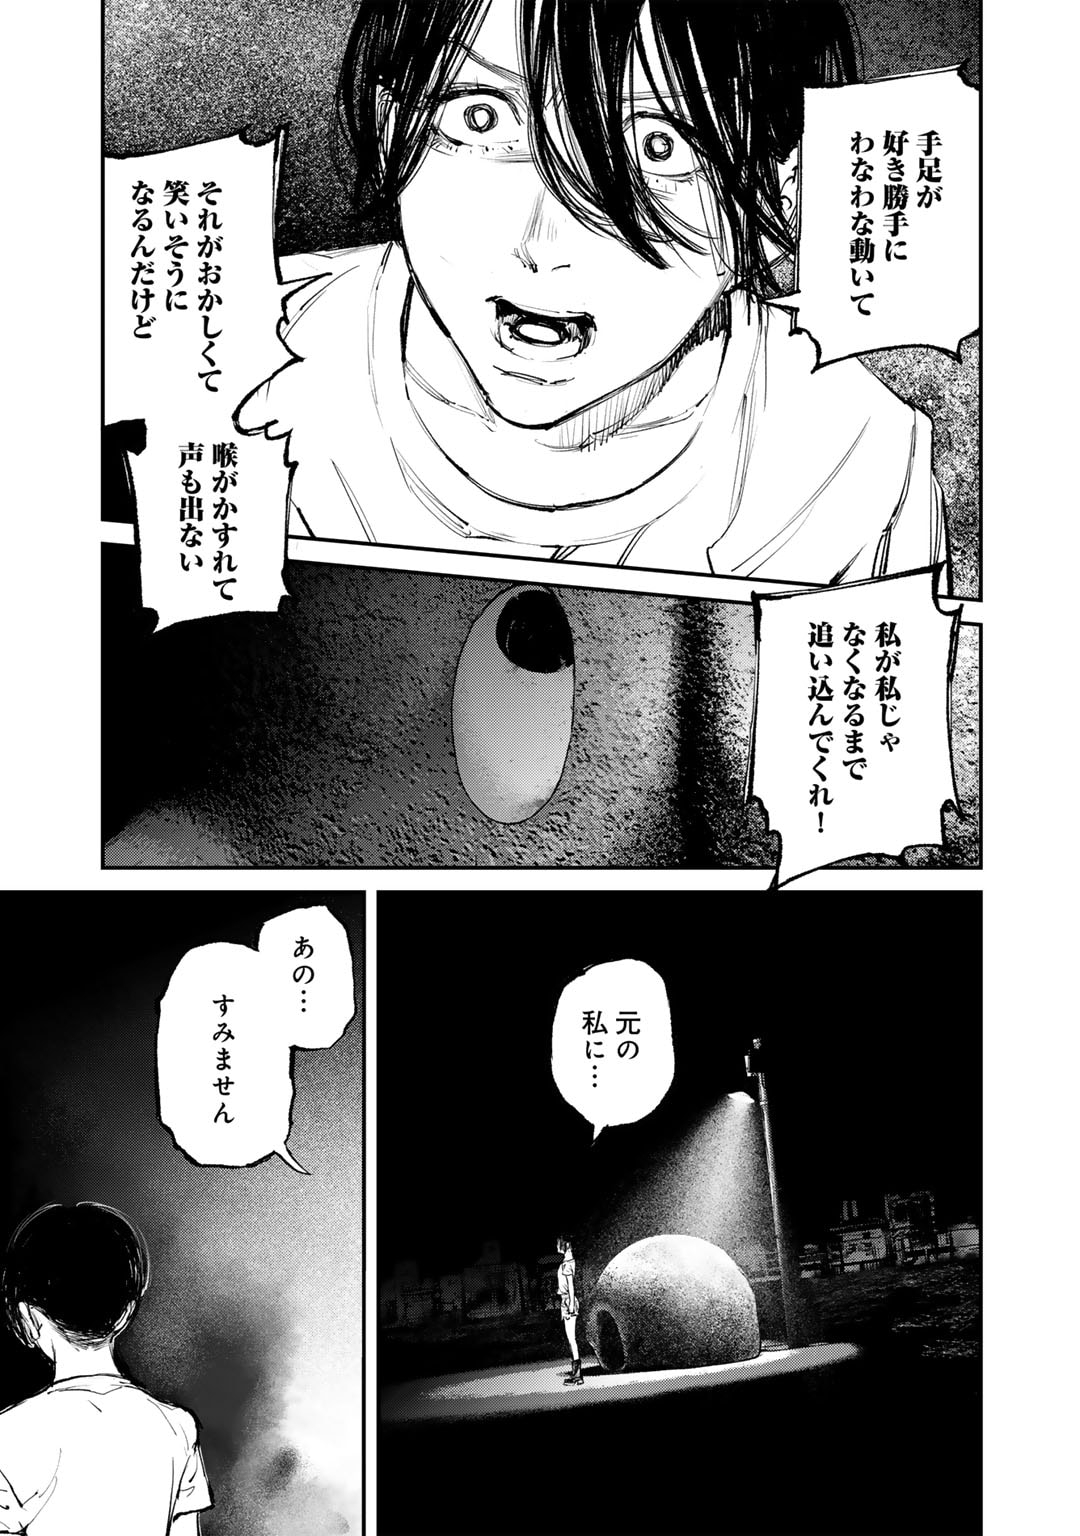 Kanata Is Into More Darker - Chapter 2 - Page 17